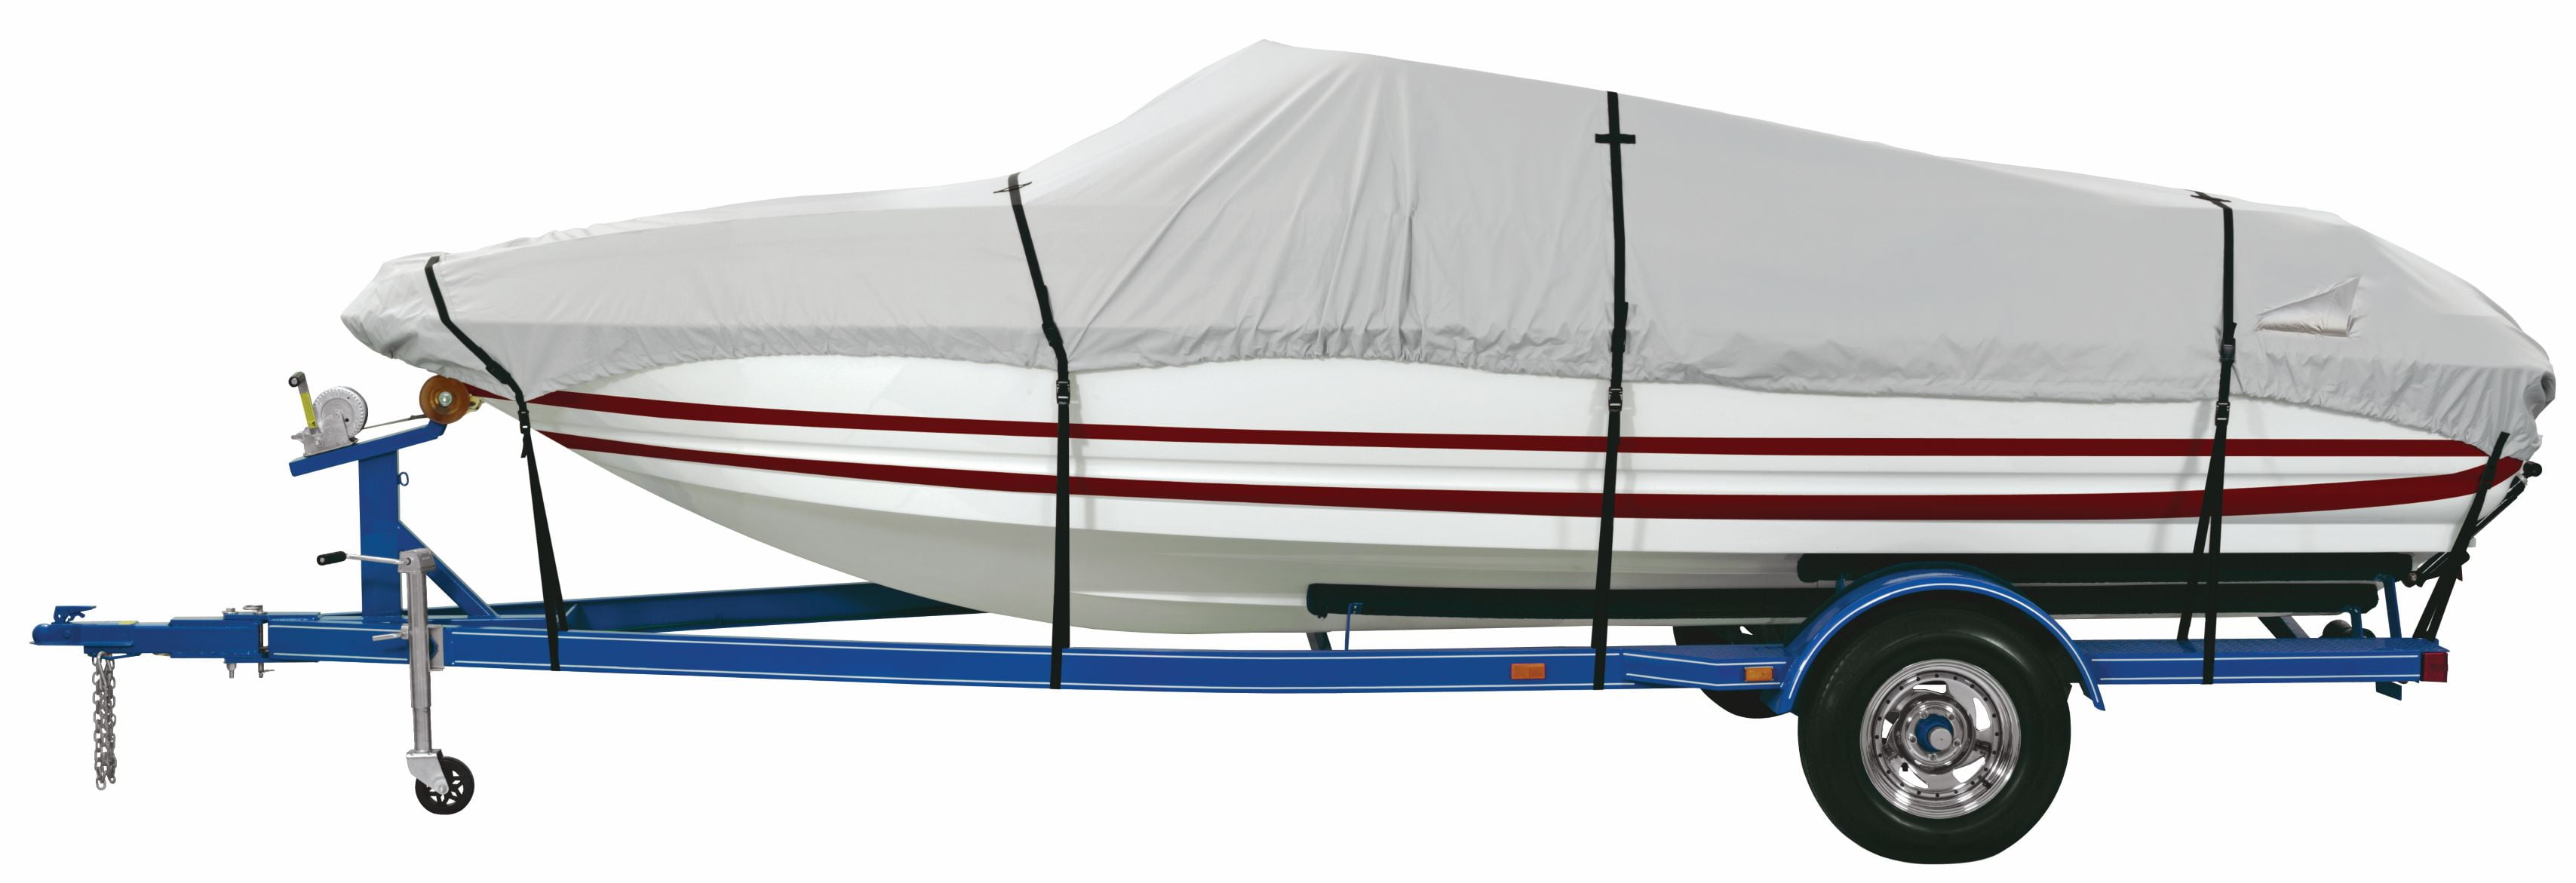 Harbor Master 600-Denier Polyester Boat Cover, Gray, Size: Fits 17'-19' Center Console